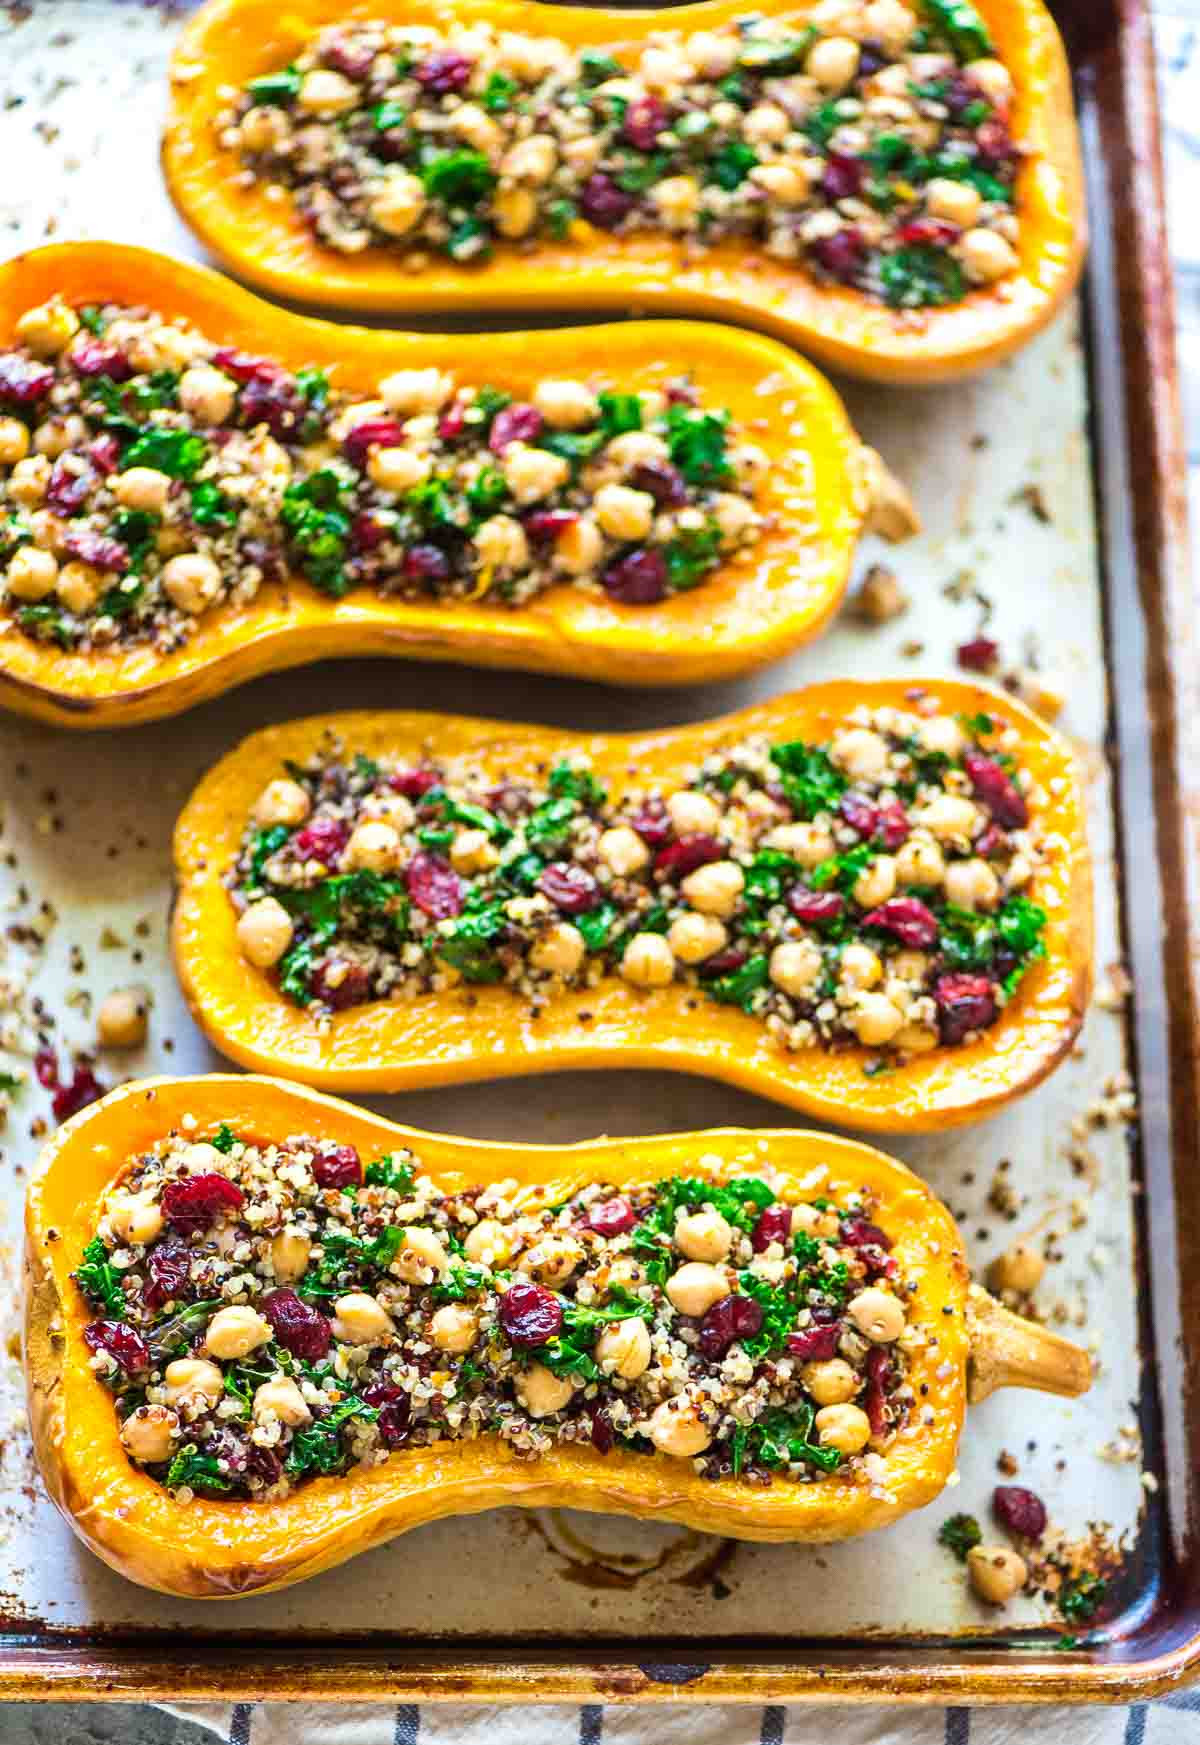 Is Butternut Squash Healthy
 Quinoa Stuffed Butternut Squash with Cranberries and Kale